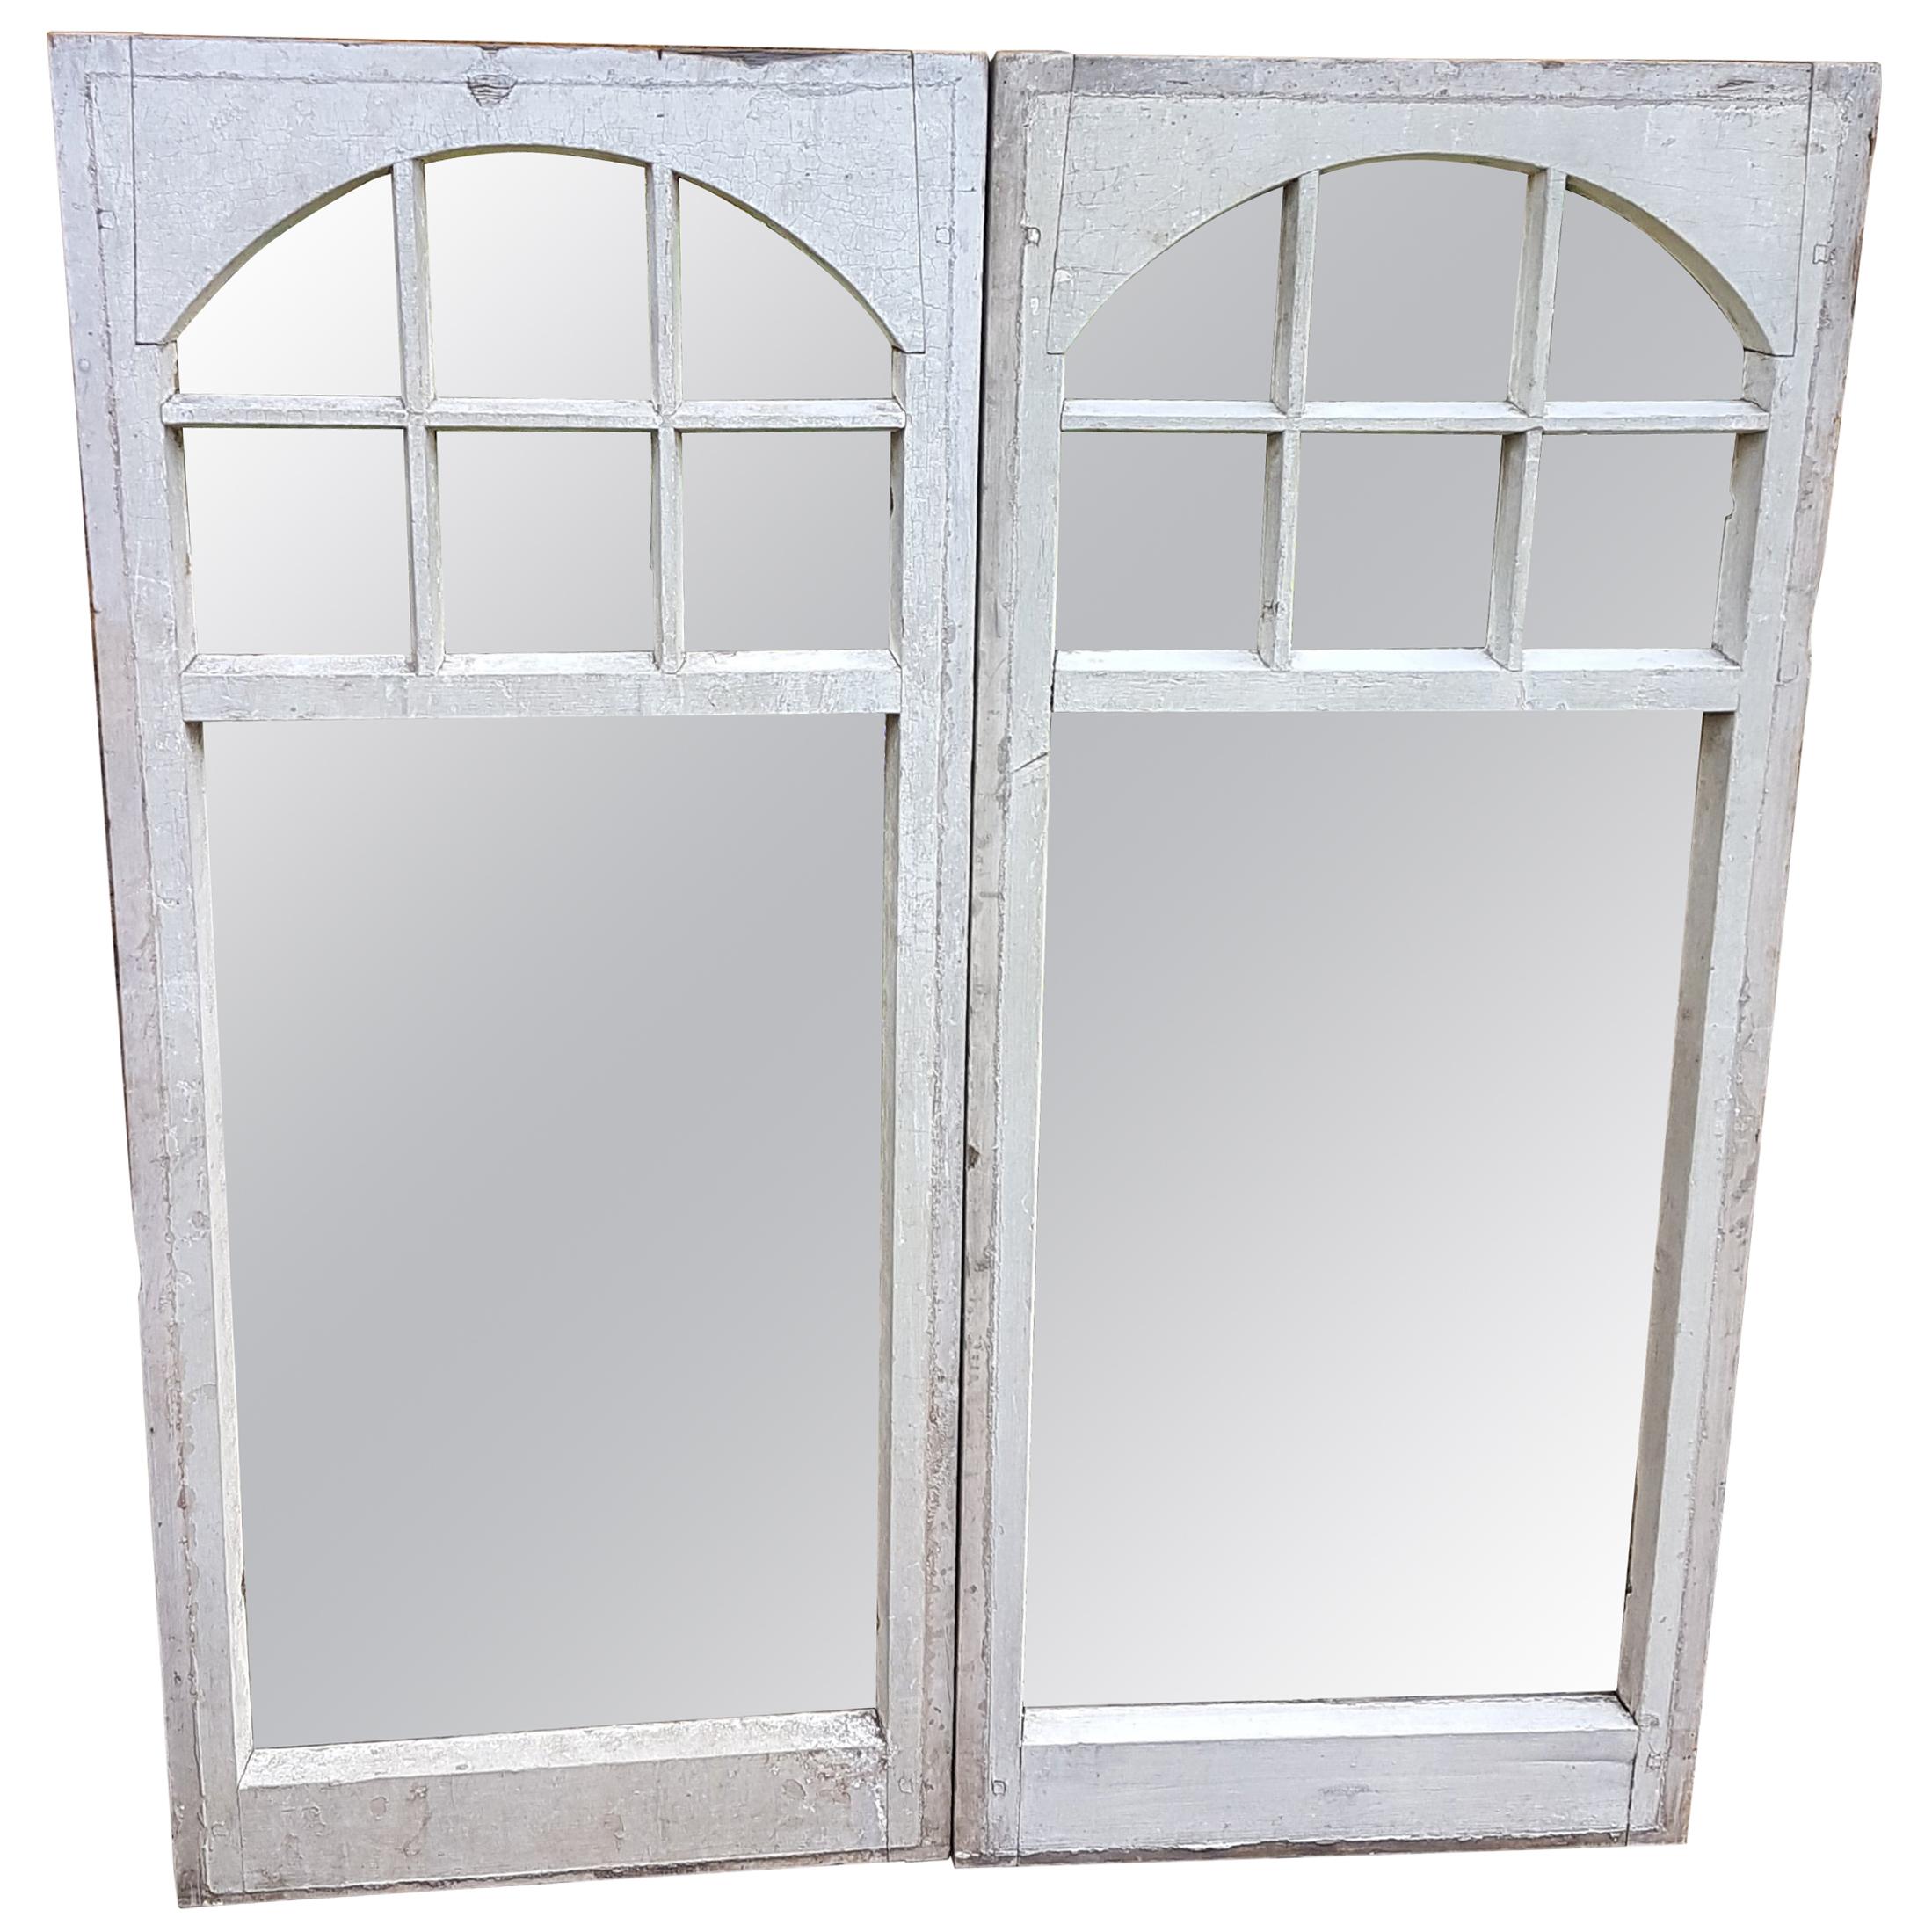 Pair of Mirrored Edwardian Sunroom Frames For Sale